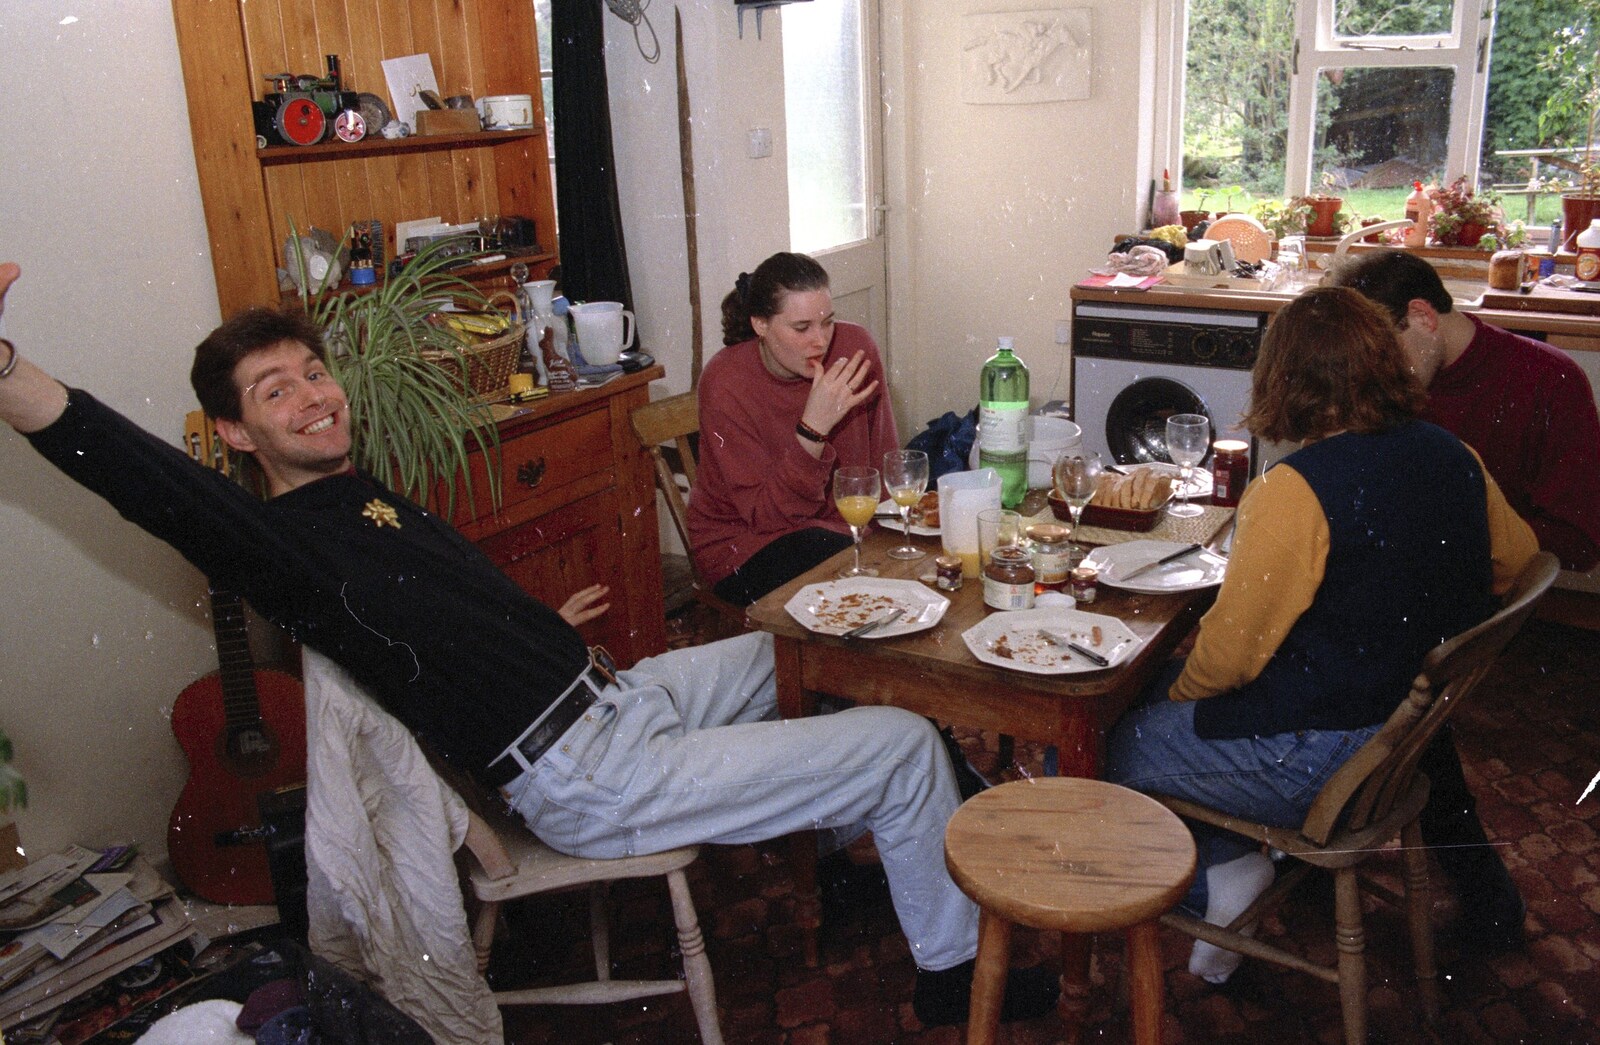 A Phil and Sean Weekend, and Bedroom Building, Brome, Norwich and Southwold - 18th April 1995: Sean leans back at breakfast